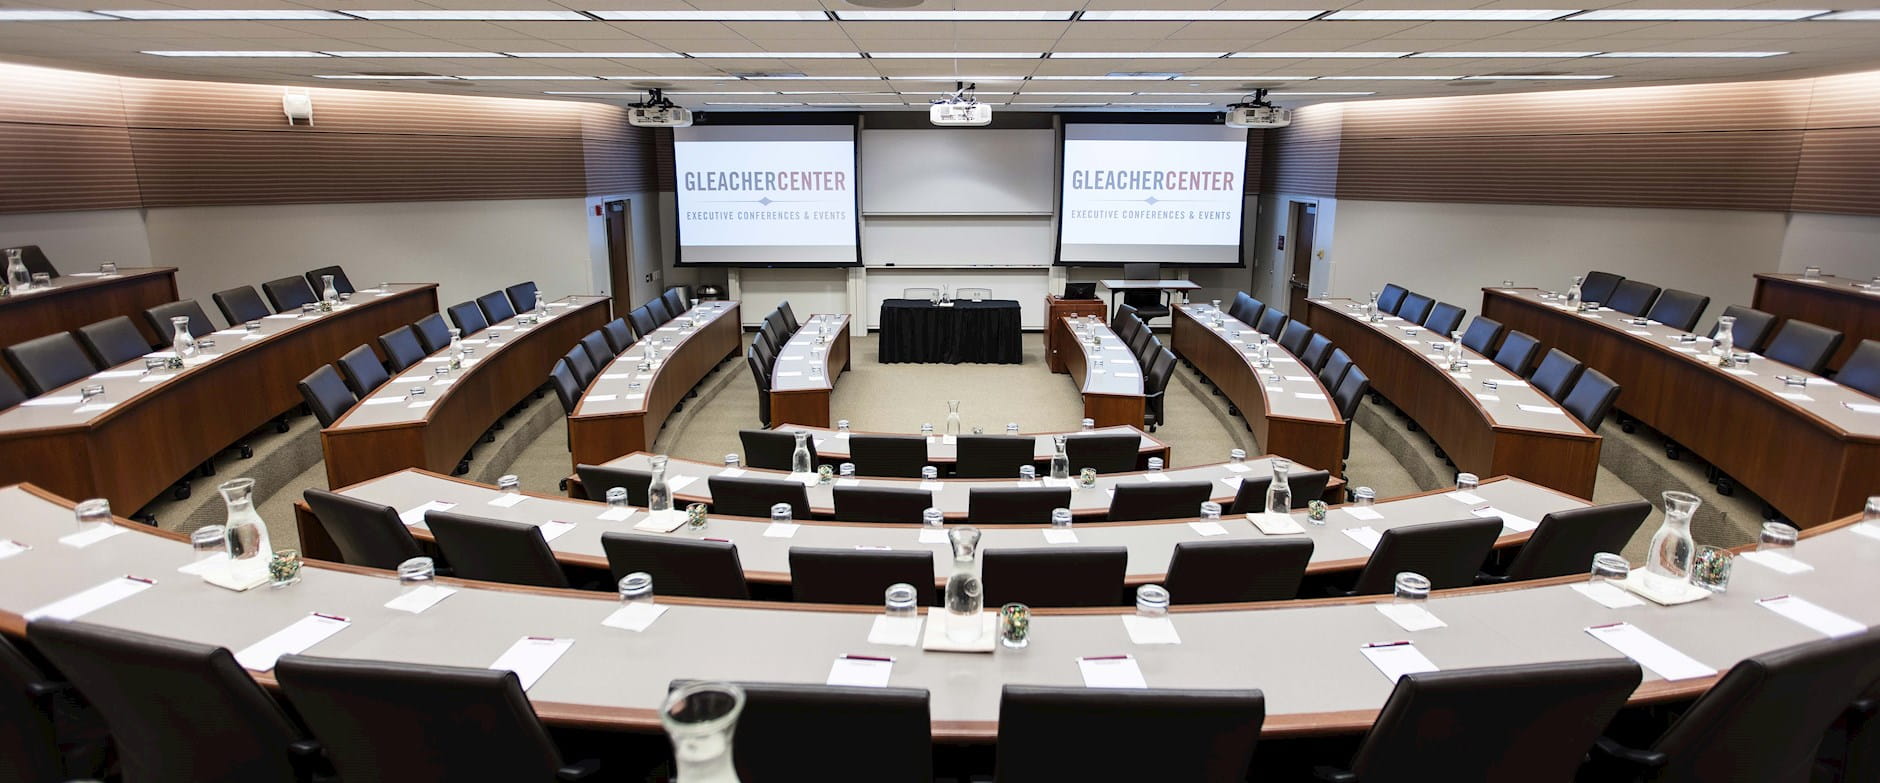 View from the back of room 400 at the Gleacher Center looking out over tiered tables and chairs in a semi-circle with a presenters' table and 2 projector screens at the front